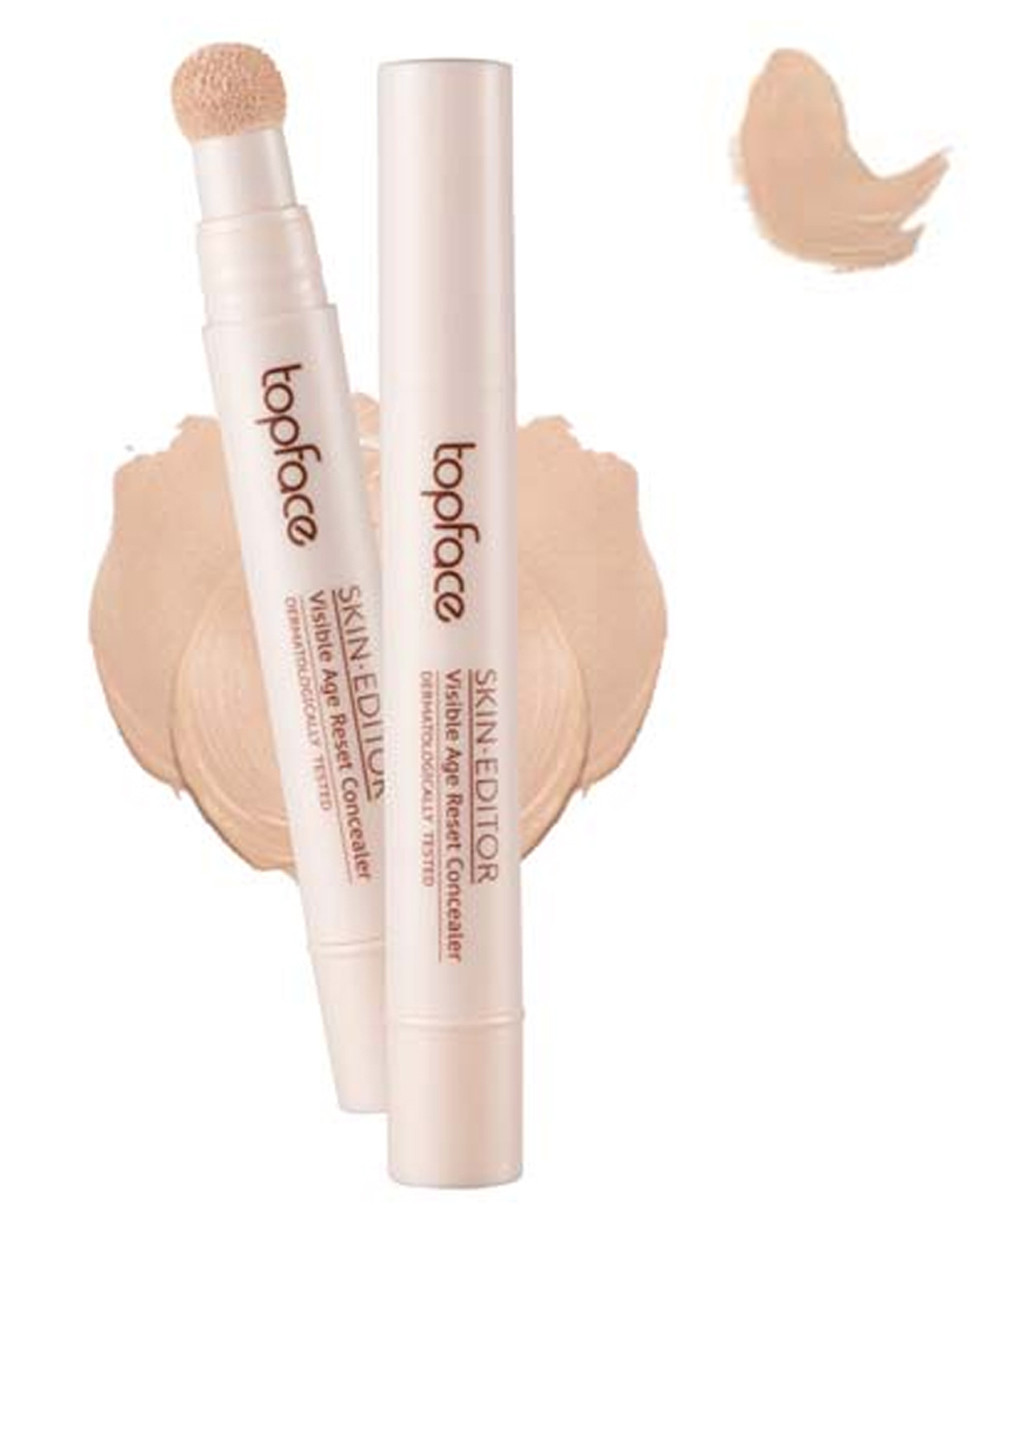 Консилер Skin Editor Concealer PT466 004,5.5 мл TopFace (83213649)